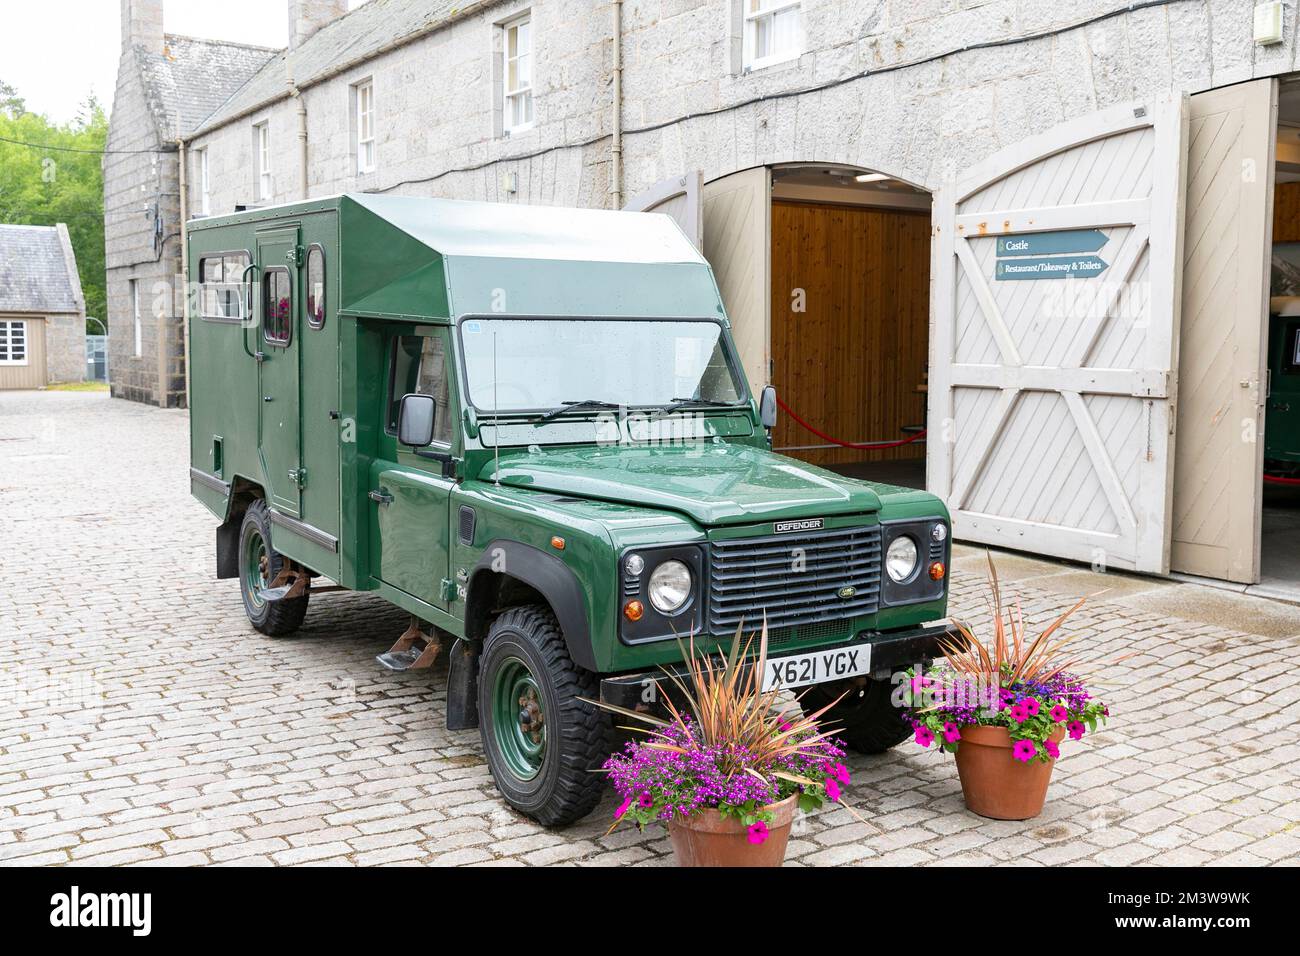 Balmoral Castle grounds and green modified Land Rover Defender part of the Queen Elizabeth 11 fleet of cars vehicles Stock Photo